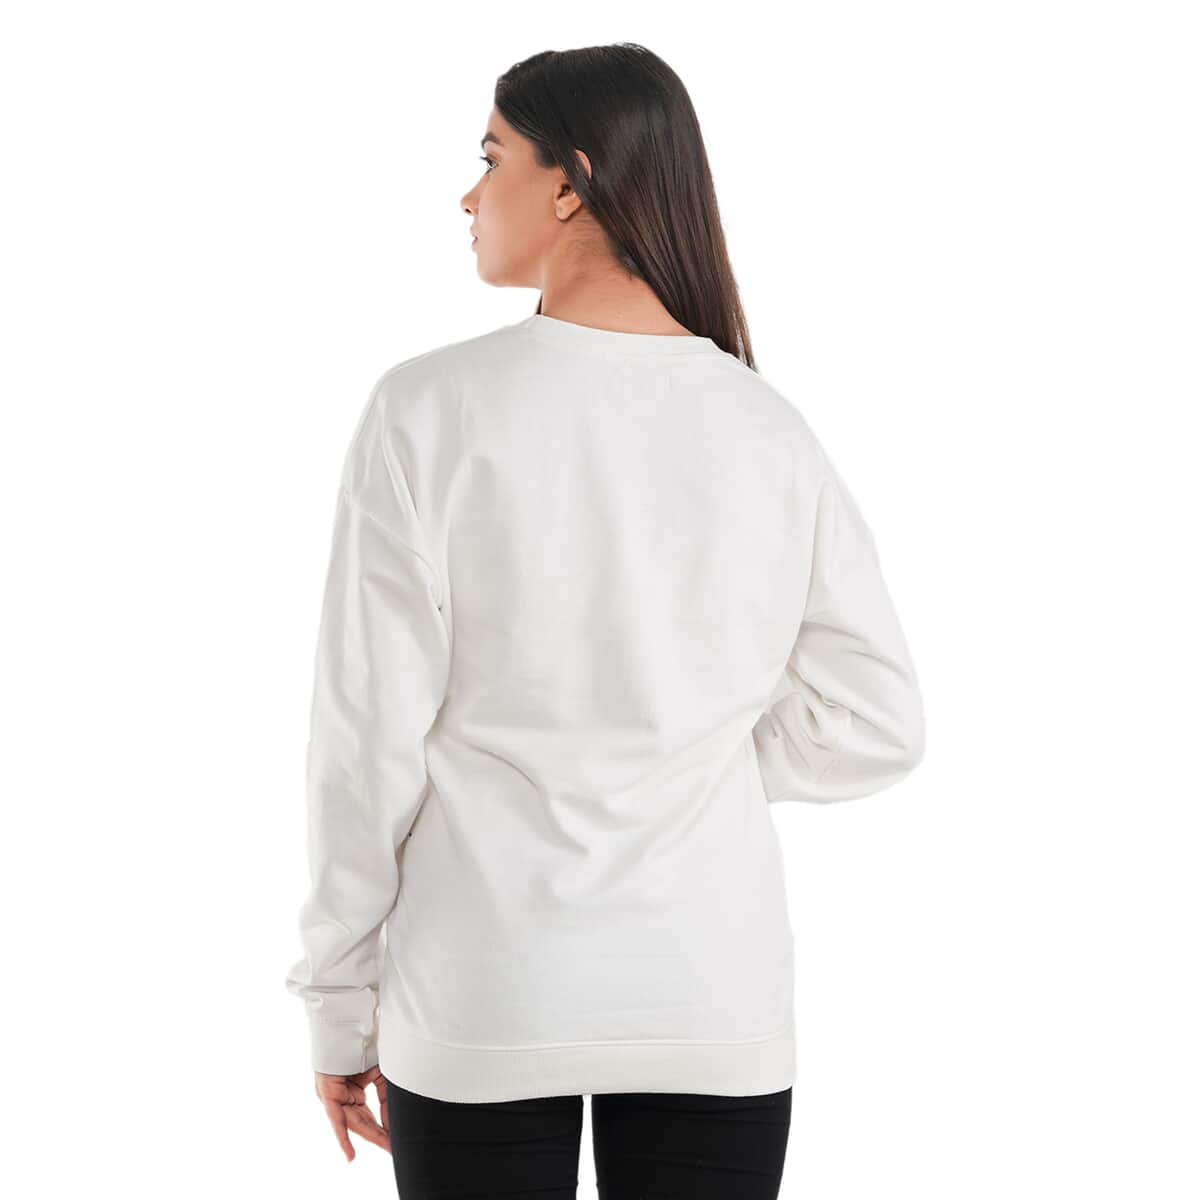 Tamsy Holiday Off White 100% CottonFleece Knit Sweatshirt - L image number 1